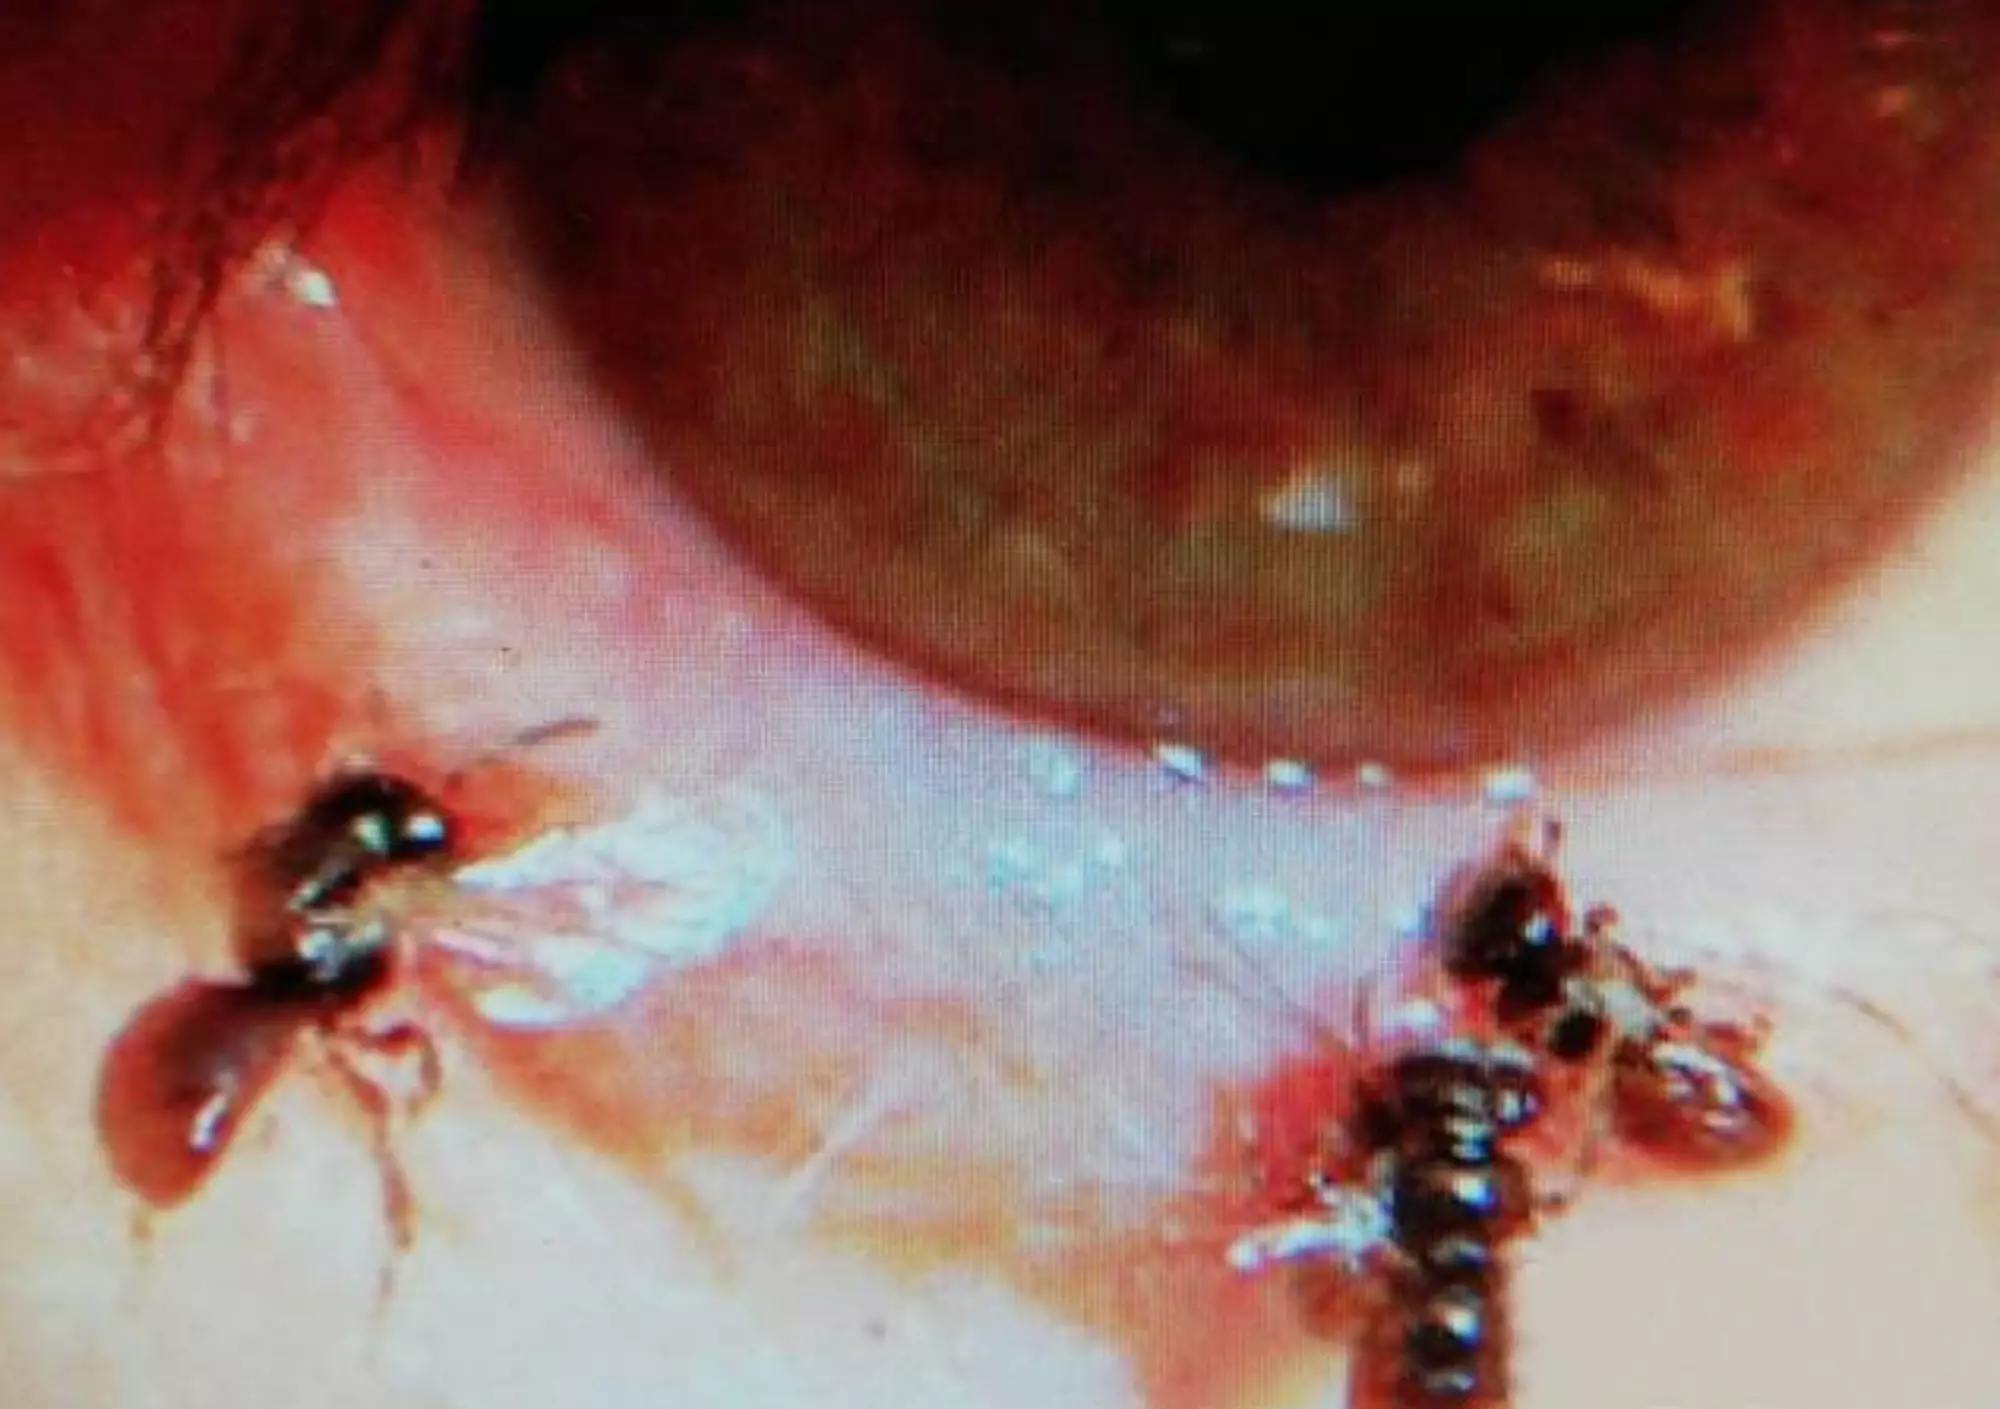 The doctor pulled four bees out of the woman's eye.